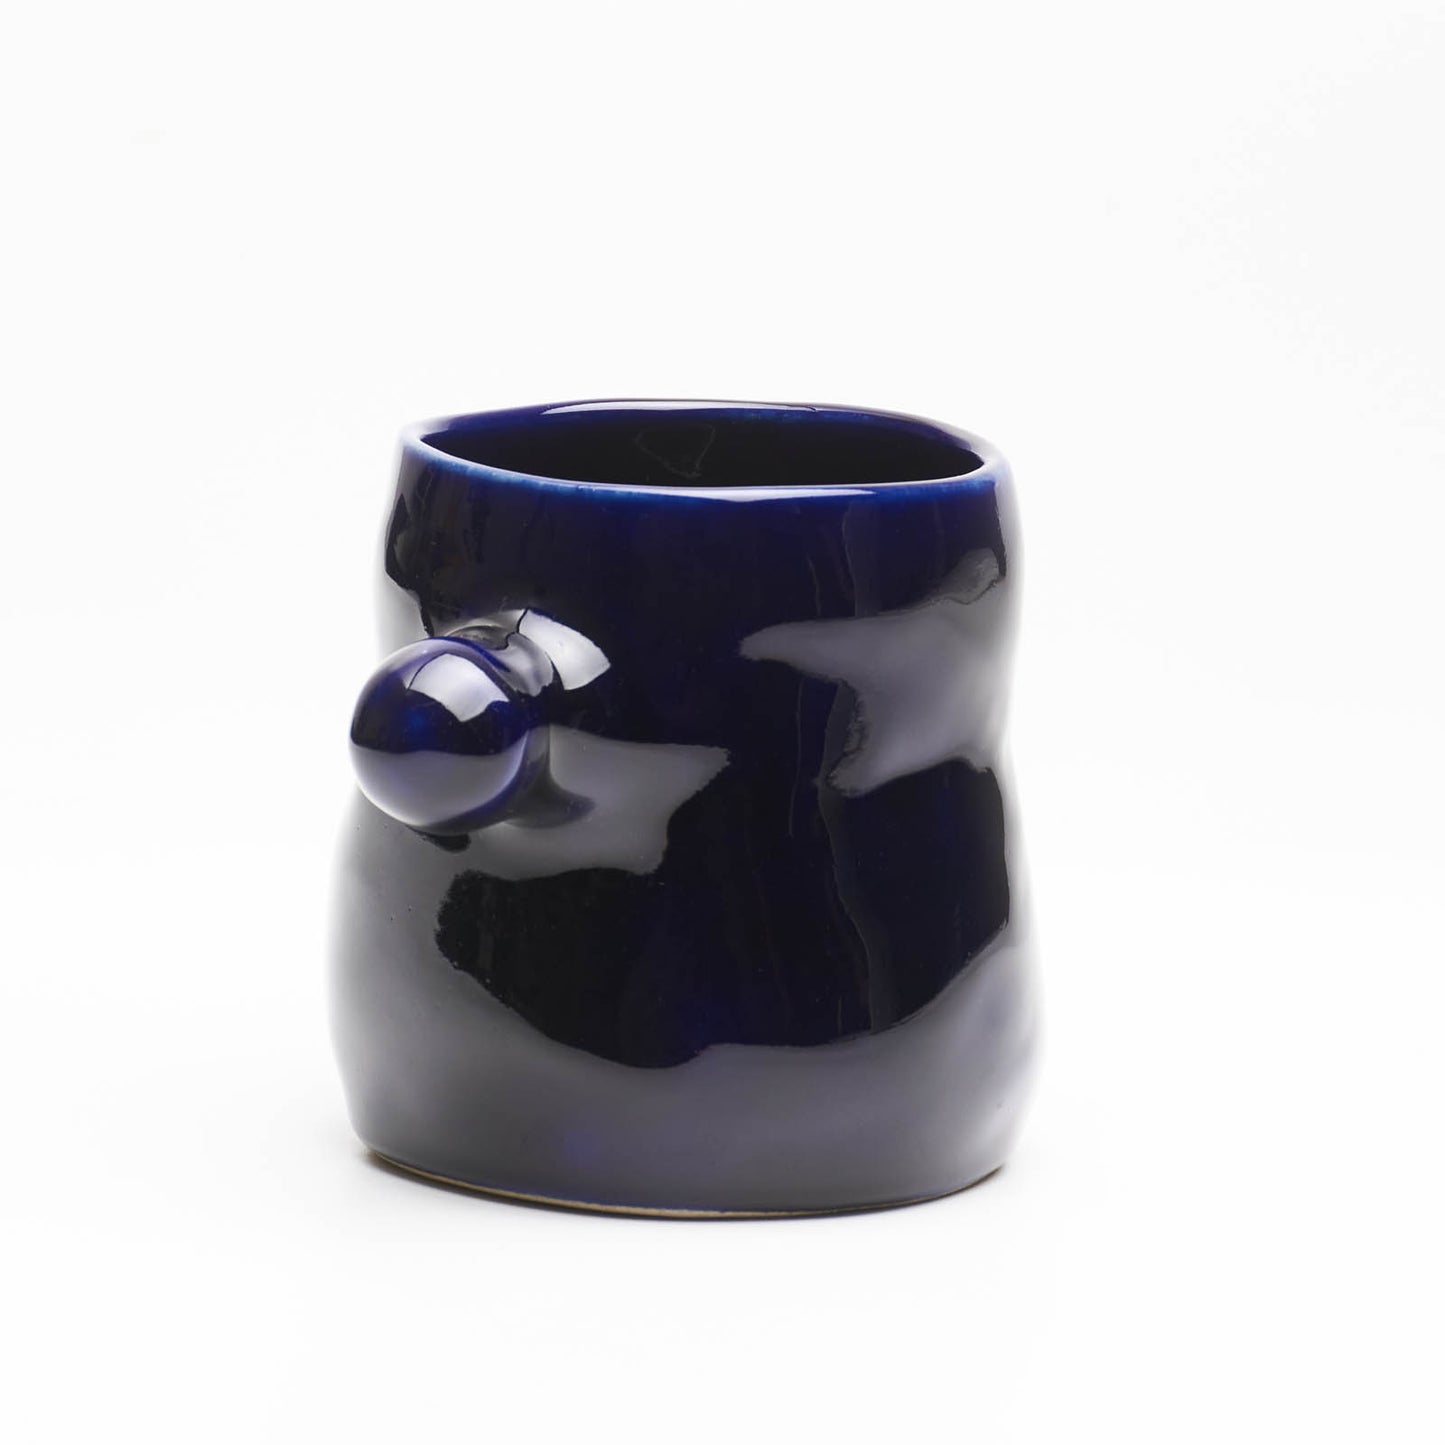 A hand-built ceramic mug in ocean blue glaze, featuring a knob-shaped handle reminiscent of underwater kelp leaves.